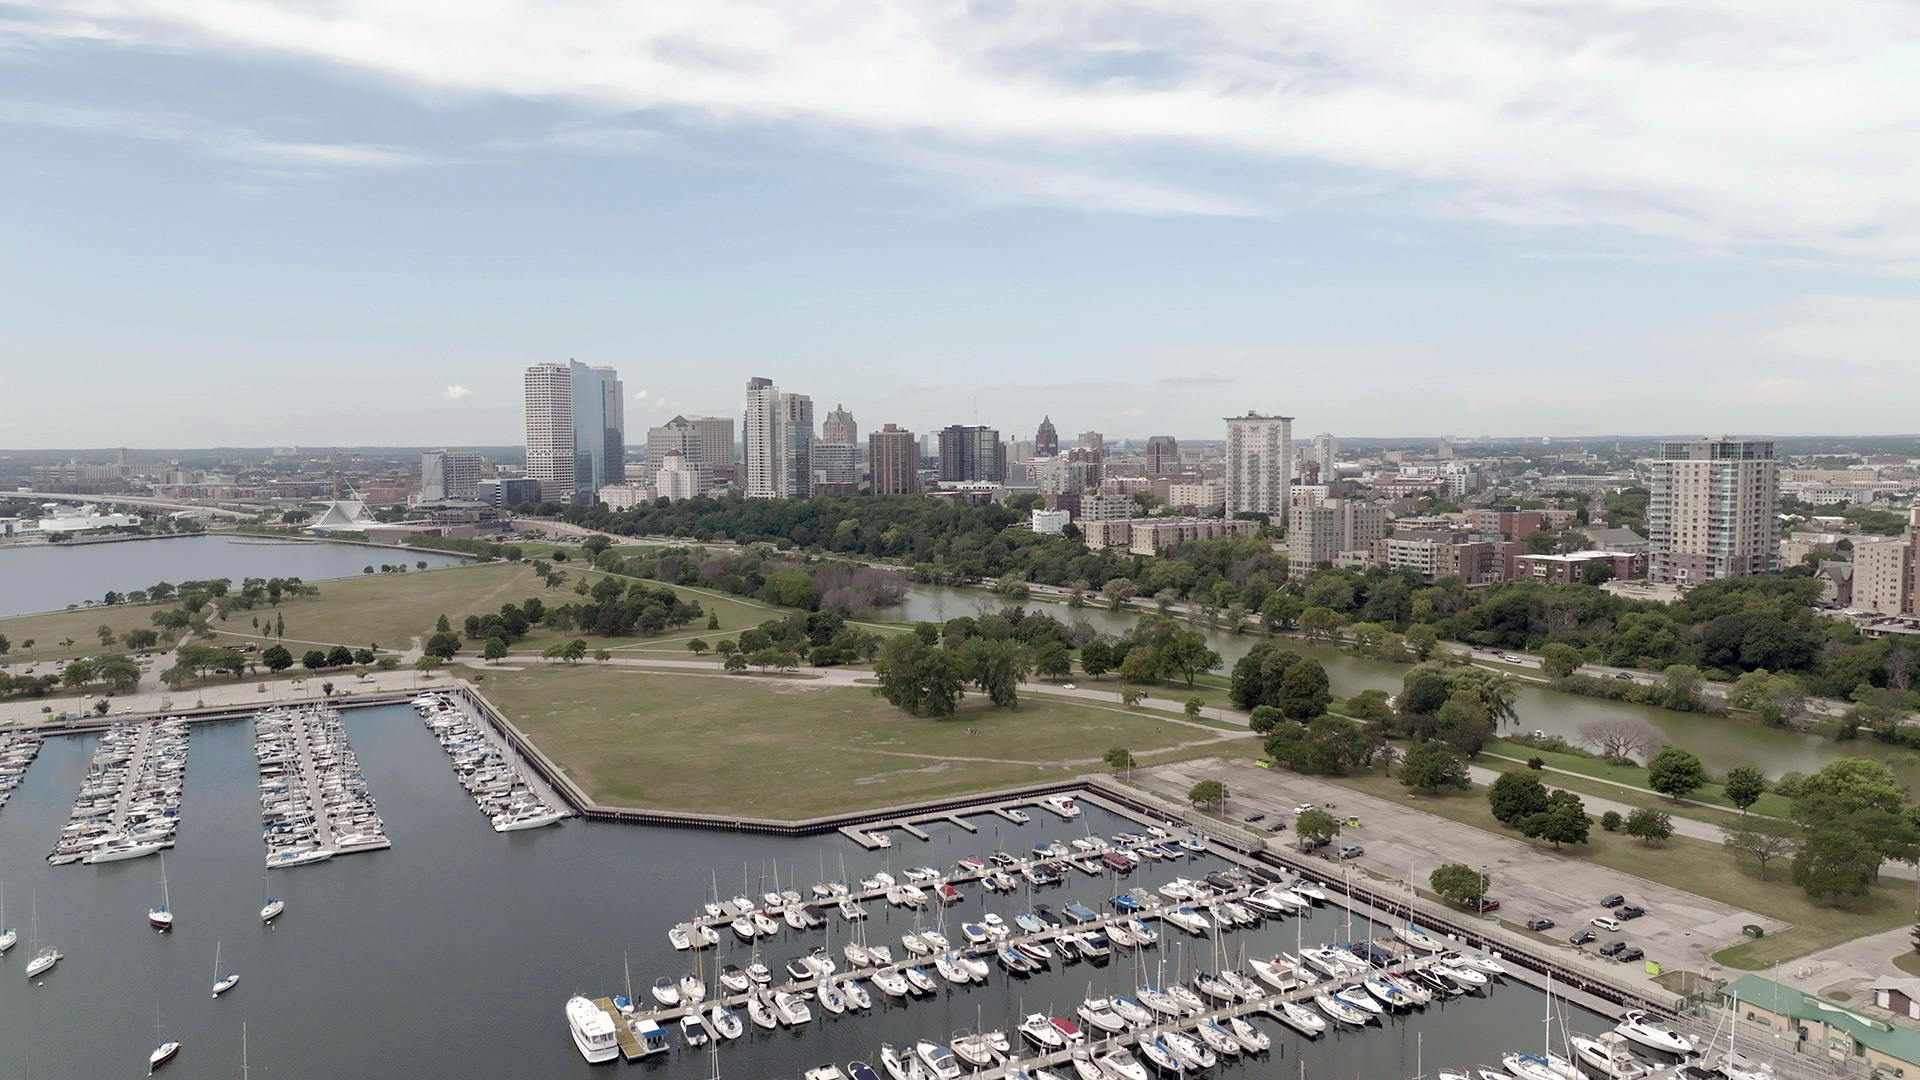 An aerial photo shows a marina filled with boats on a lakeshore sits next to a public park with numerous trees in front of an urban skyline with tall buildings under a partly-cloudy sky.